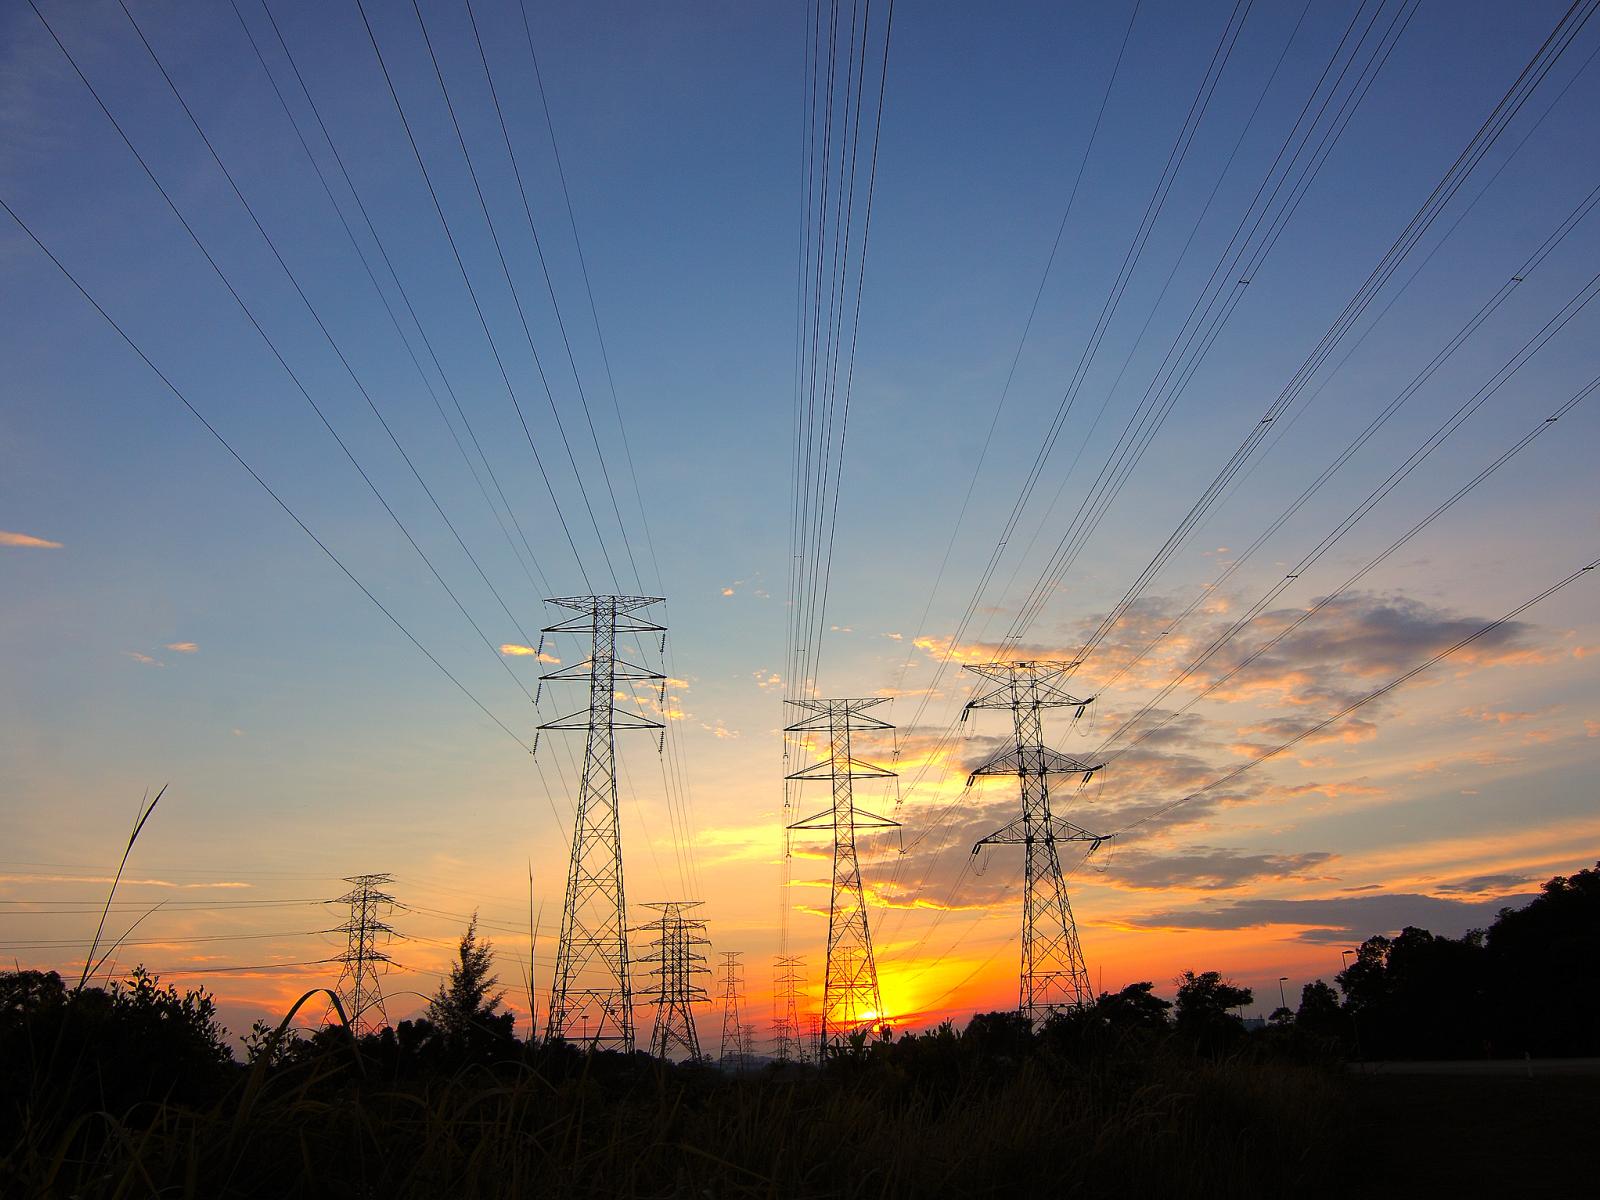 Photograph of power lines in front of a sunset